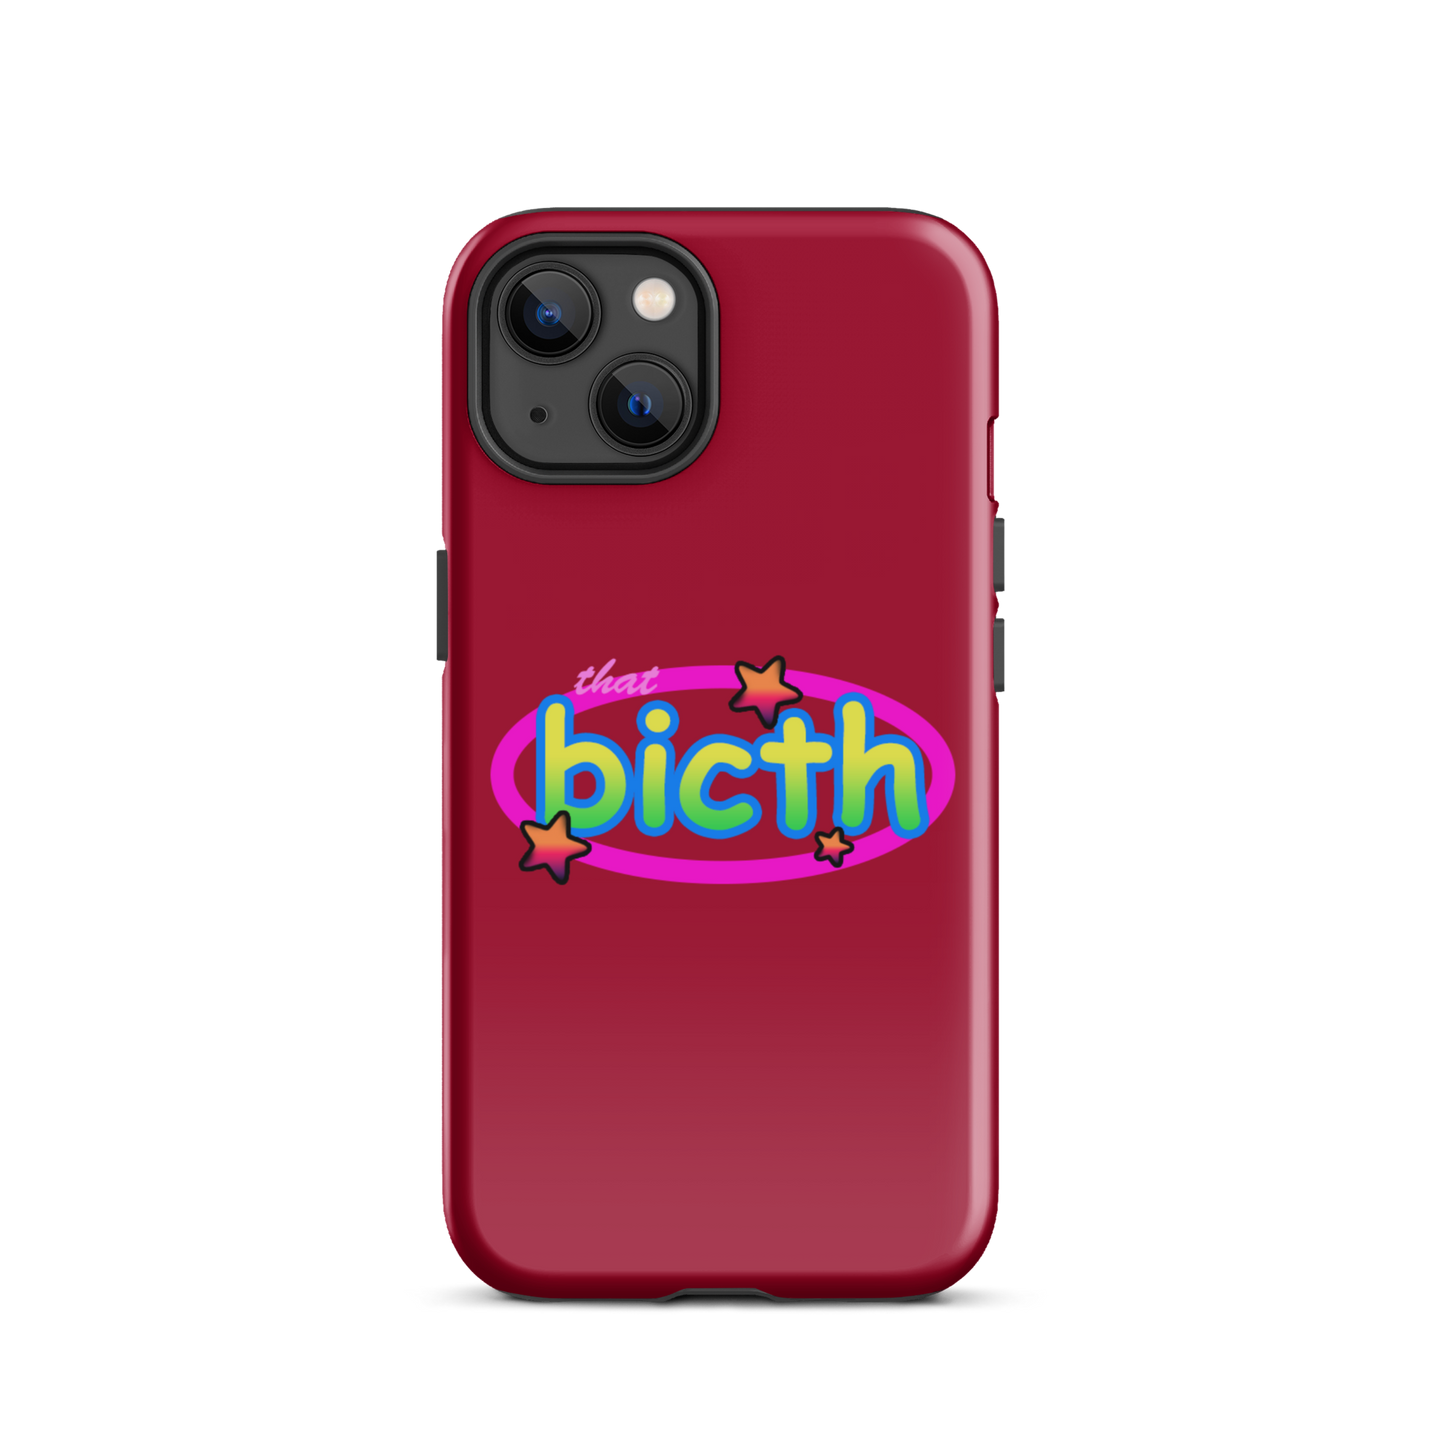 THAT BICTH IPHONE CASE